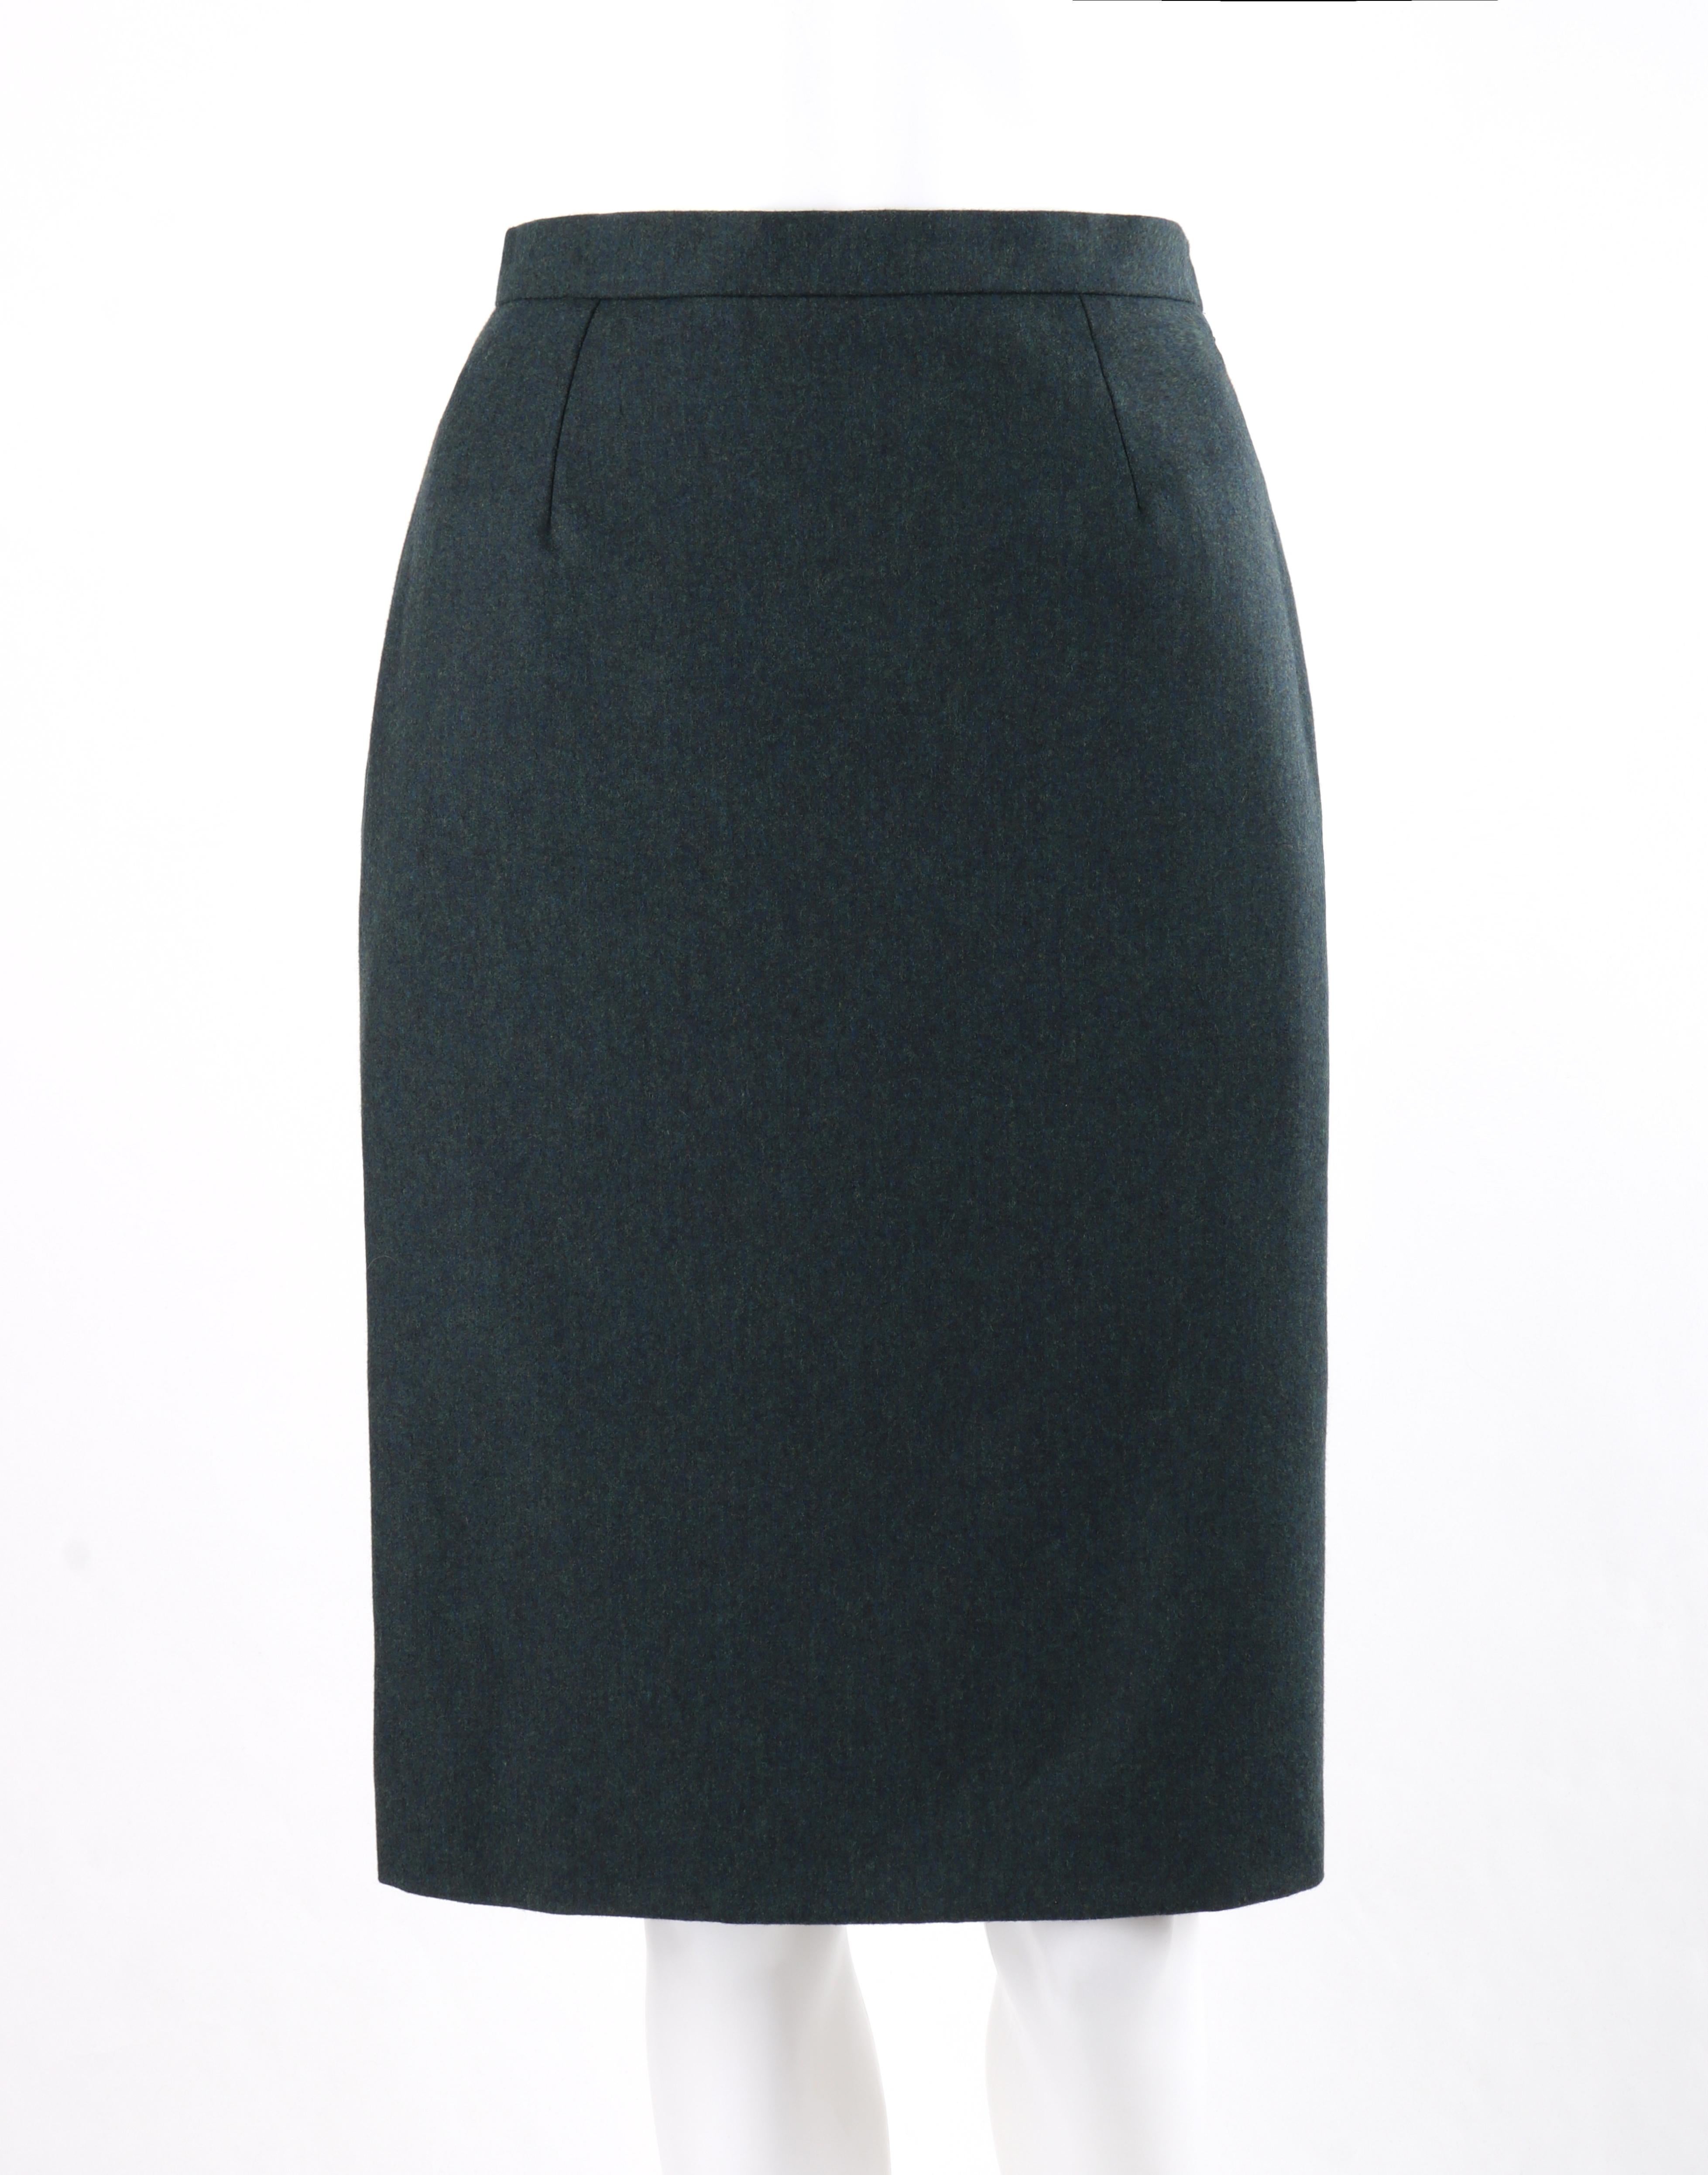 Black GIVENCHY Couture A/W 1998 ALEXANDER McQUEEN Dark Green Tailored Blazer Skirt Set For Sale